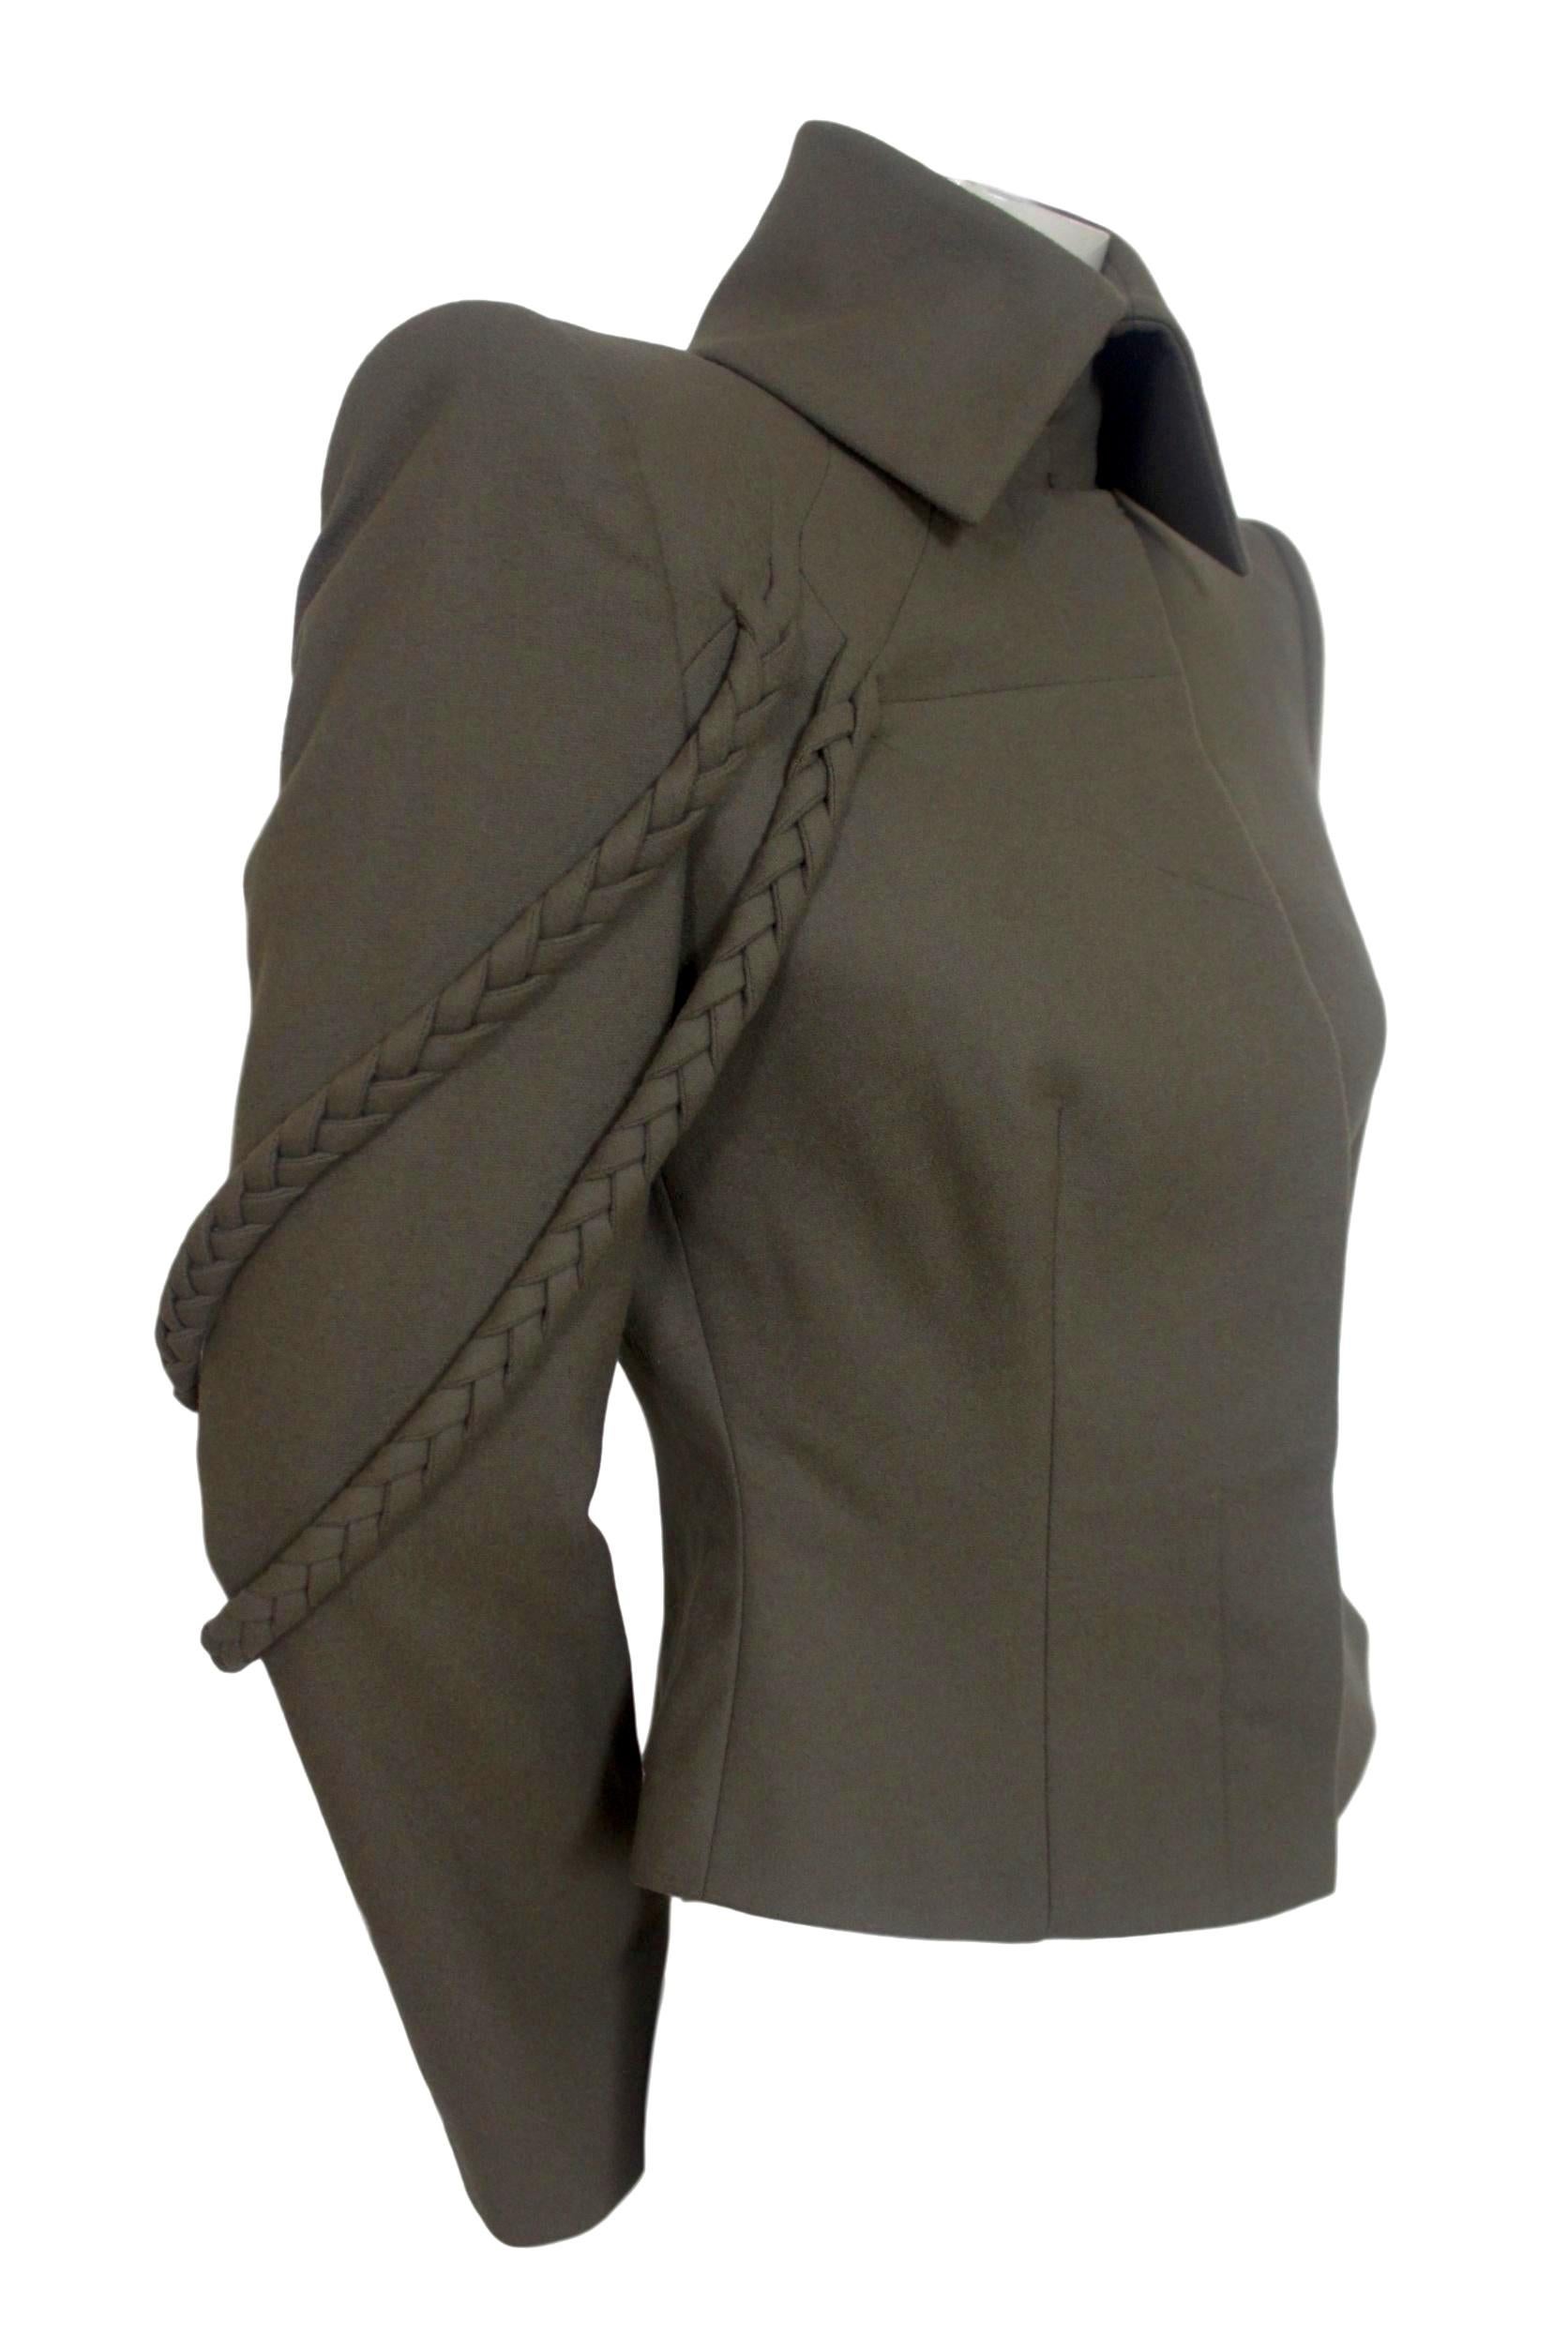 Alexander McQueen Fall/Winter 2001 Military Braid Jacket New with Labels For Sale 1